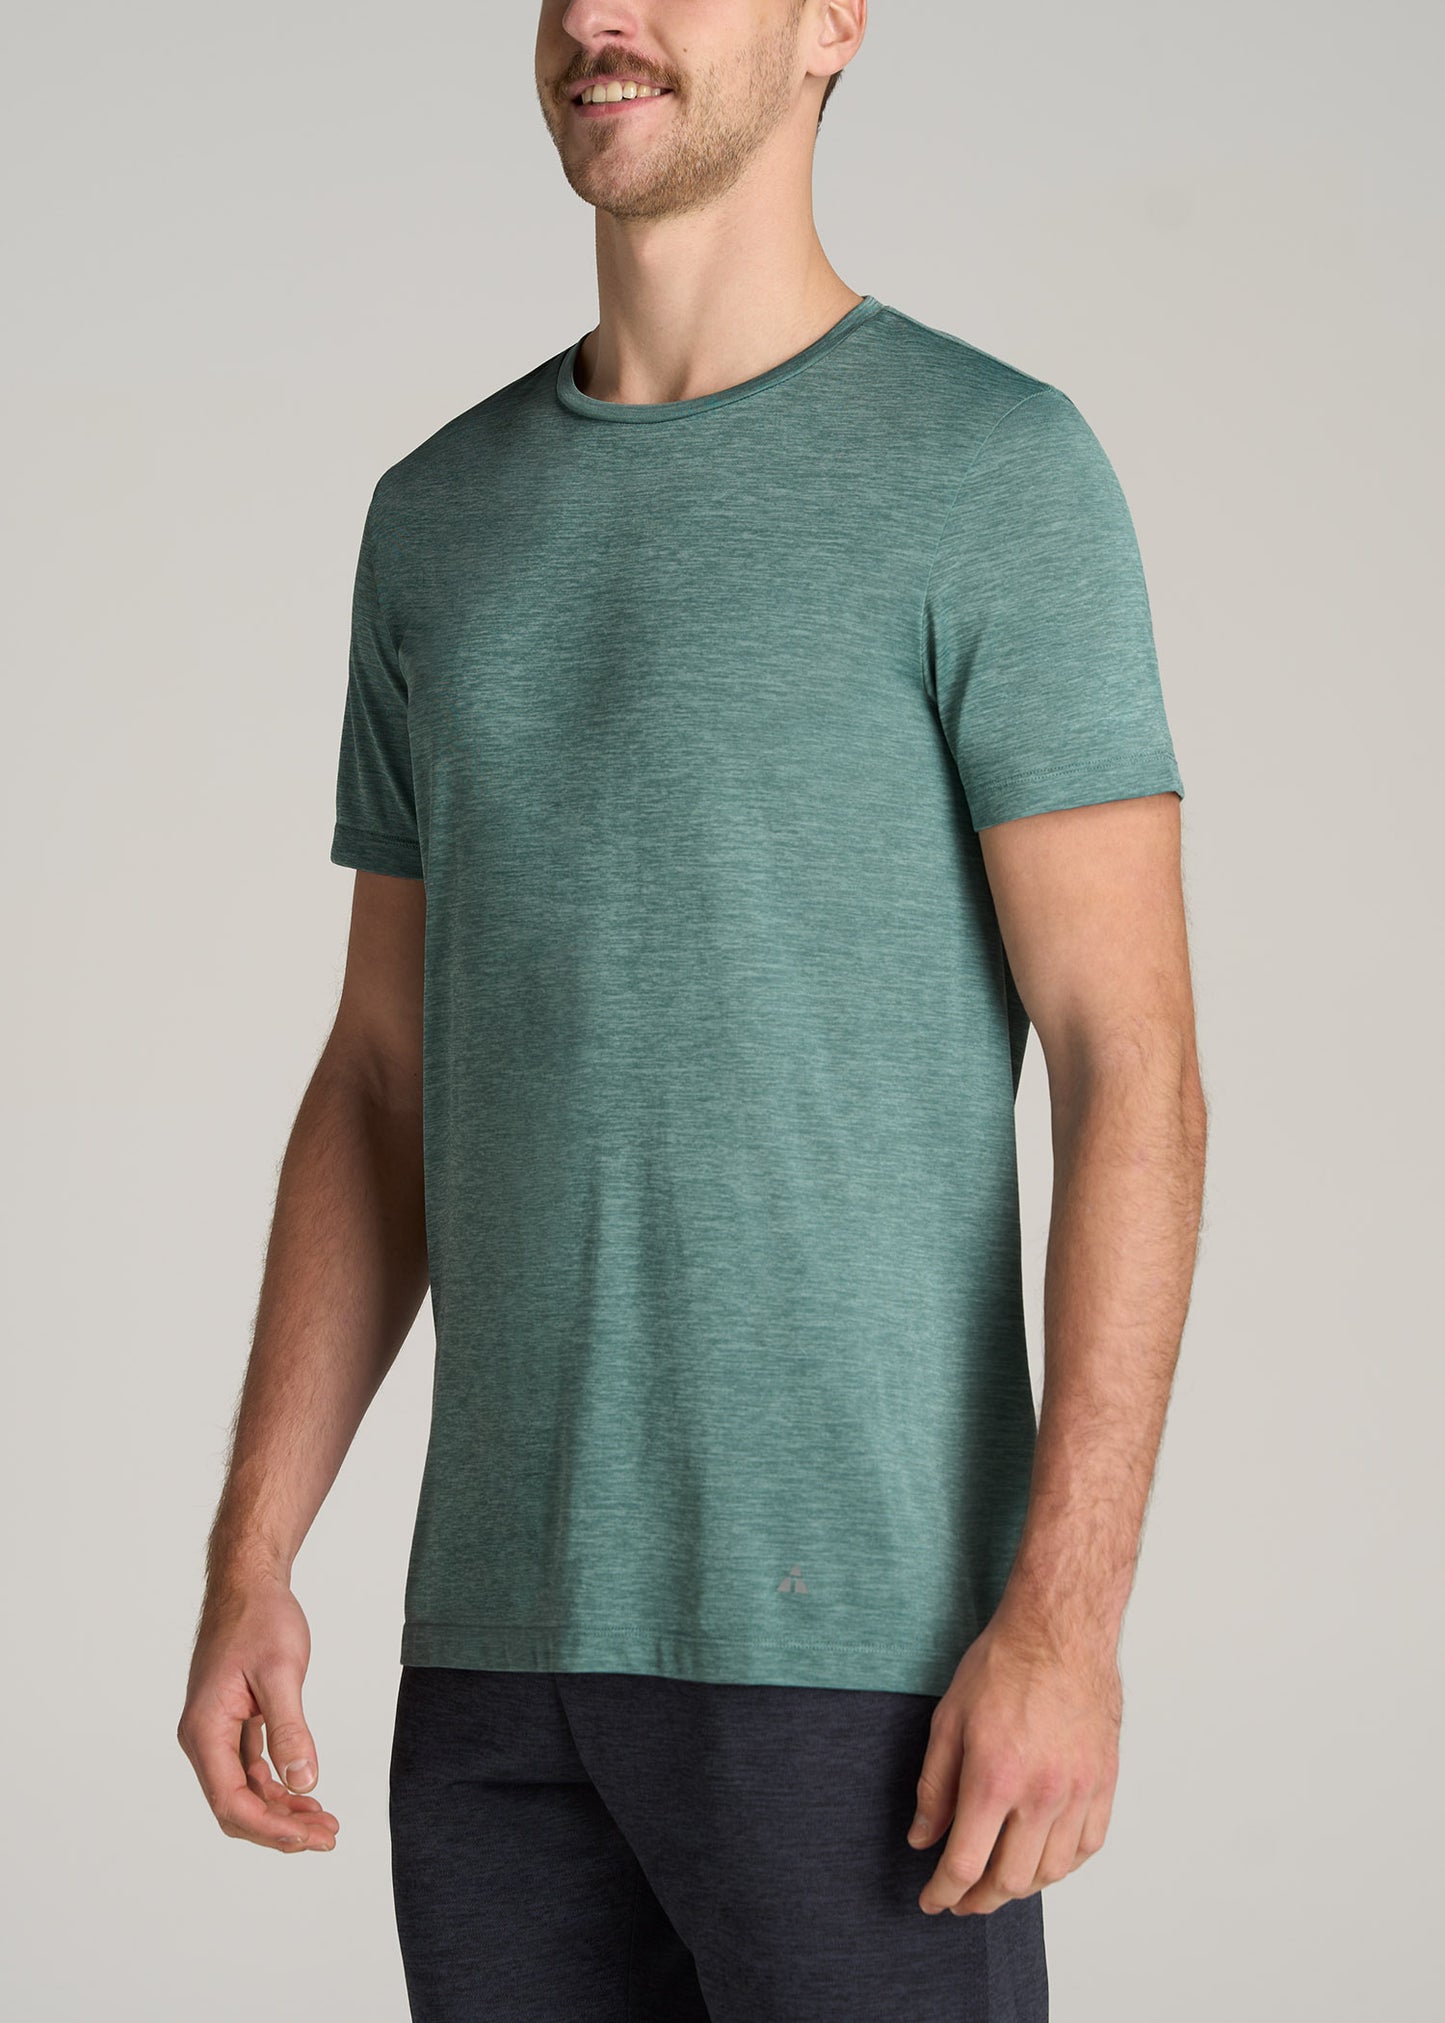     American-Tall-Men-Performance-MODERN-FIT-Athletic-Jersey-Tee-Green-Mix-side